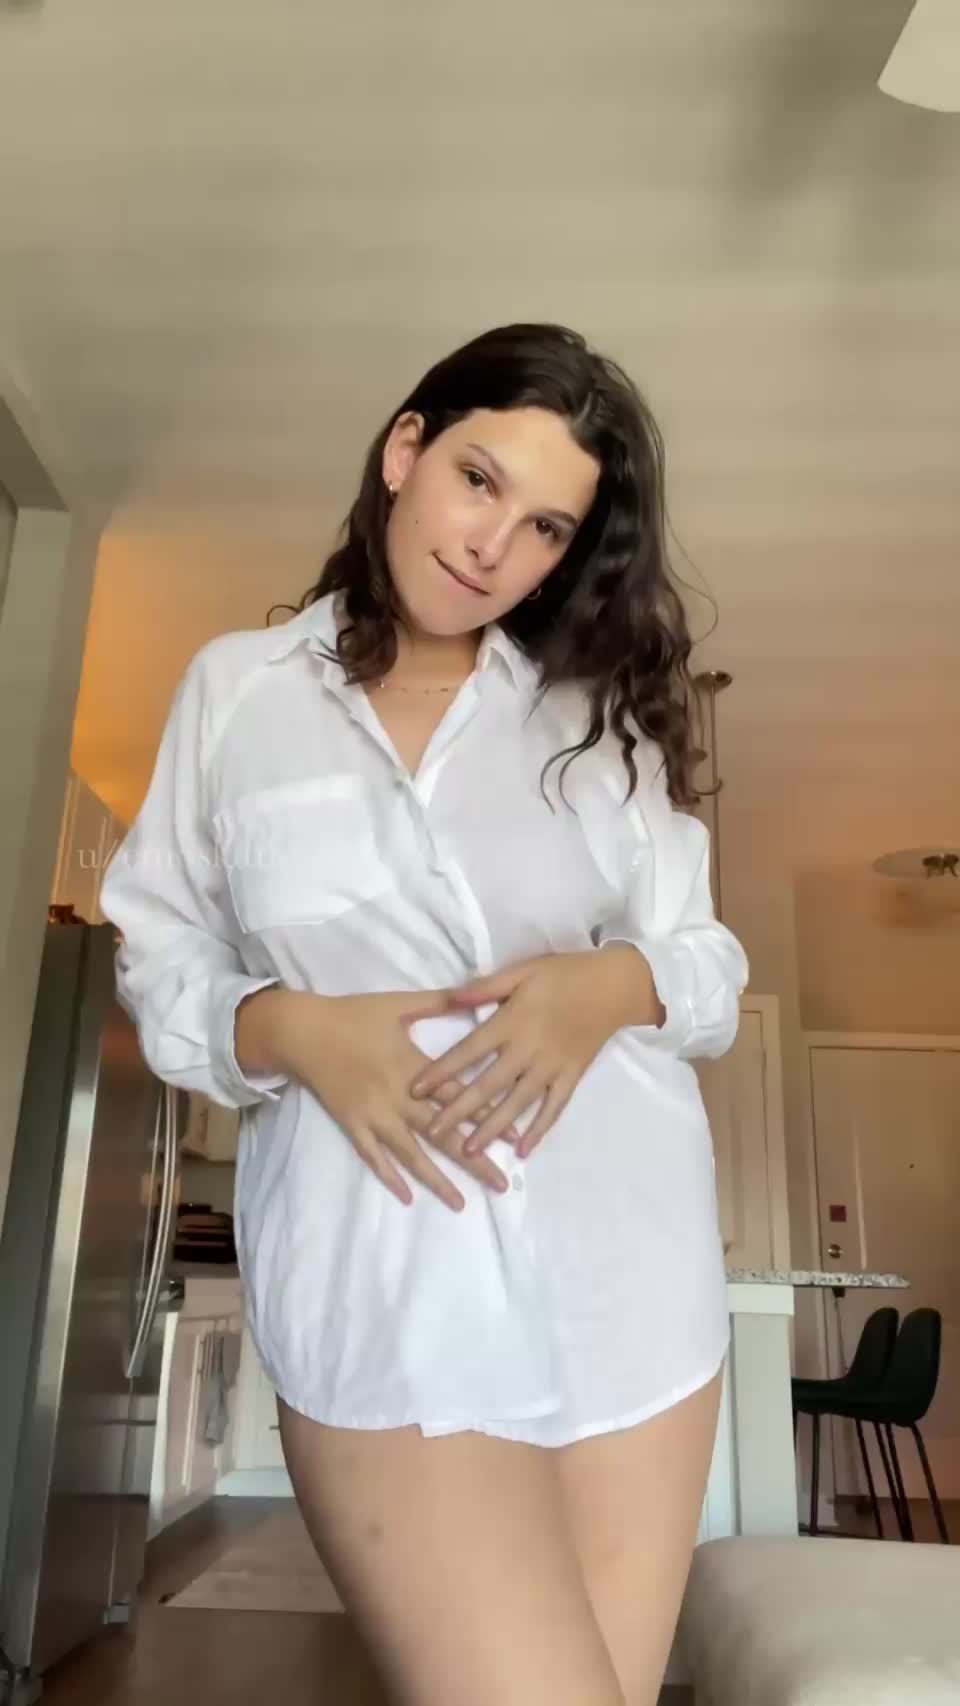 You can cum on me wherever you want : video clip